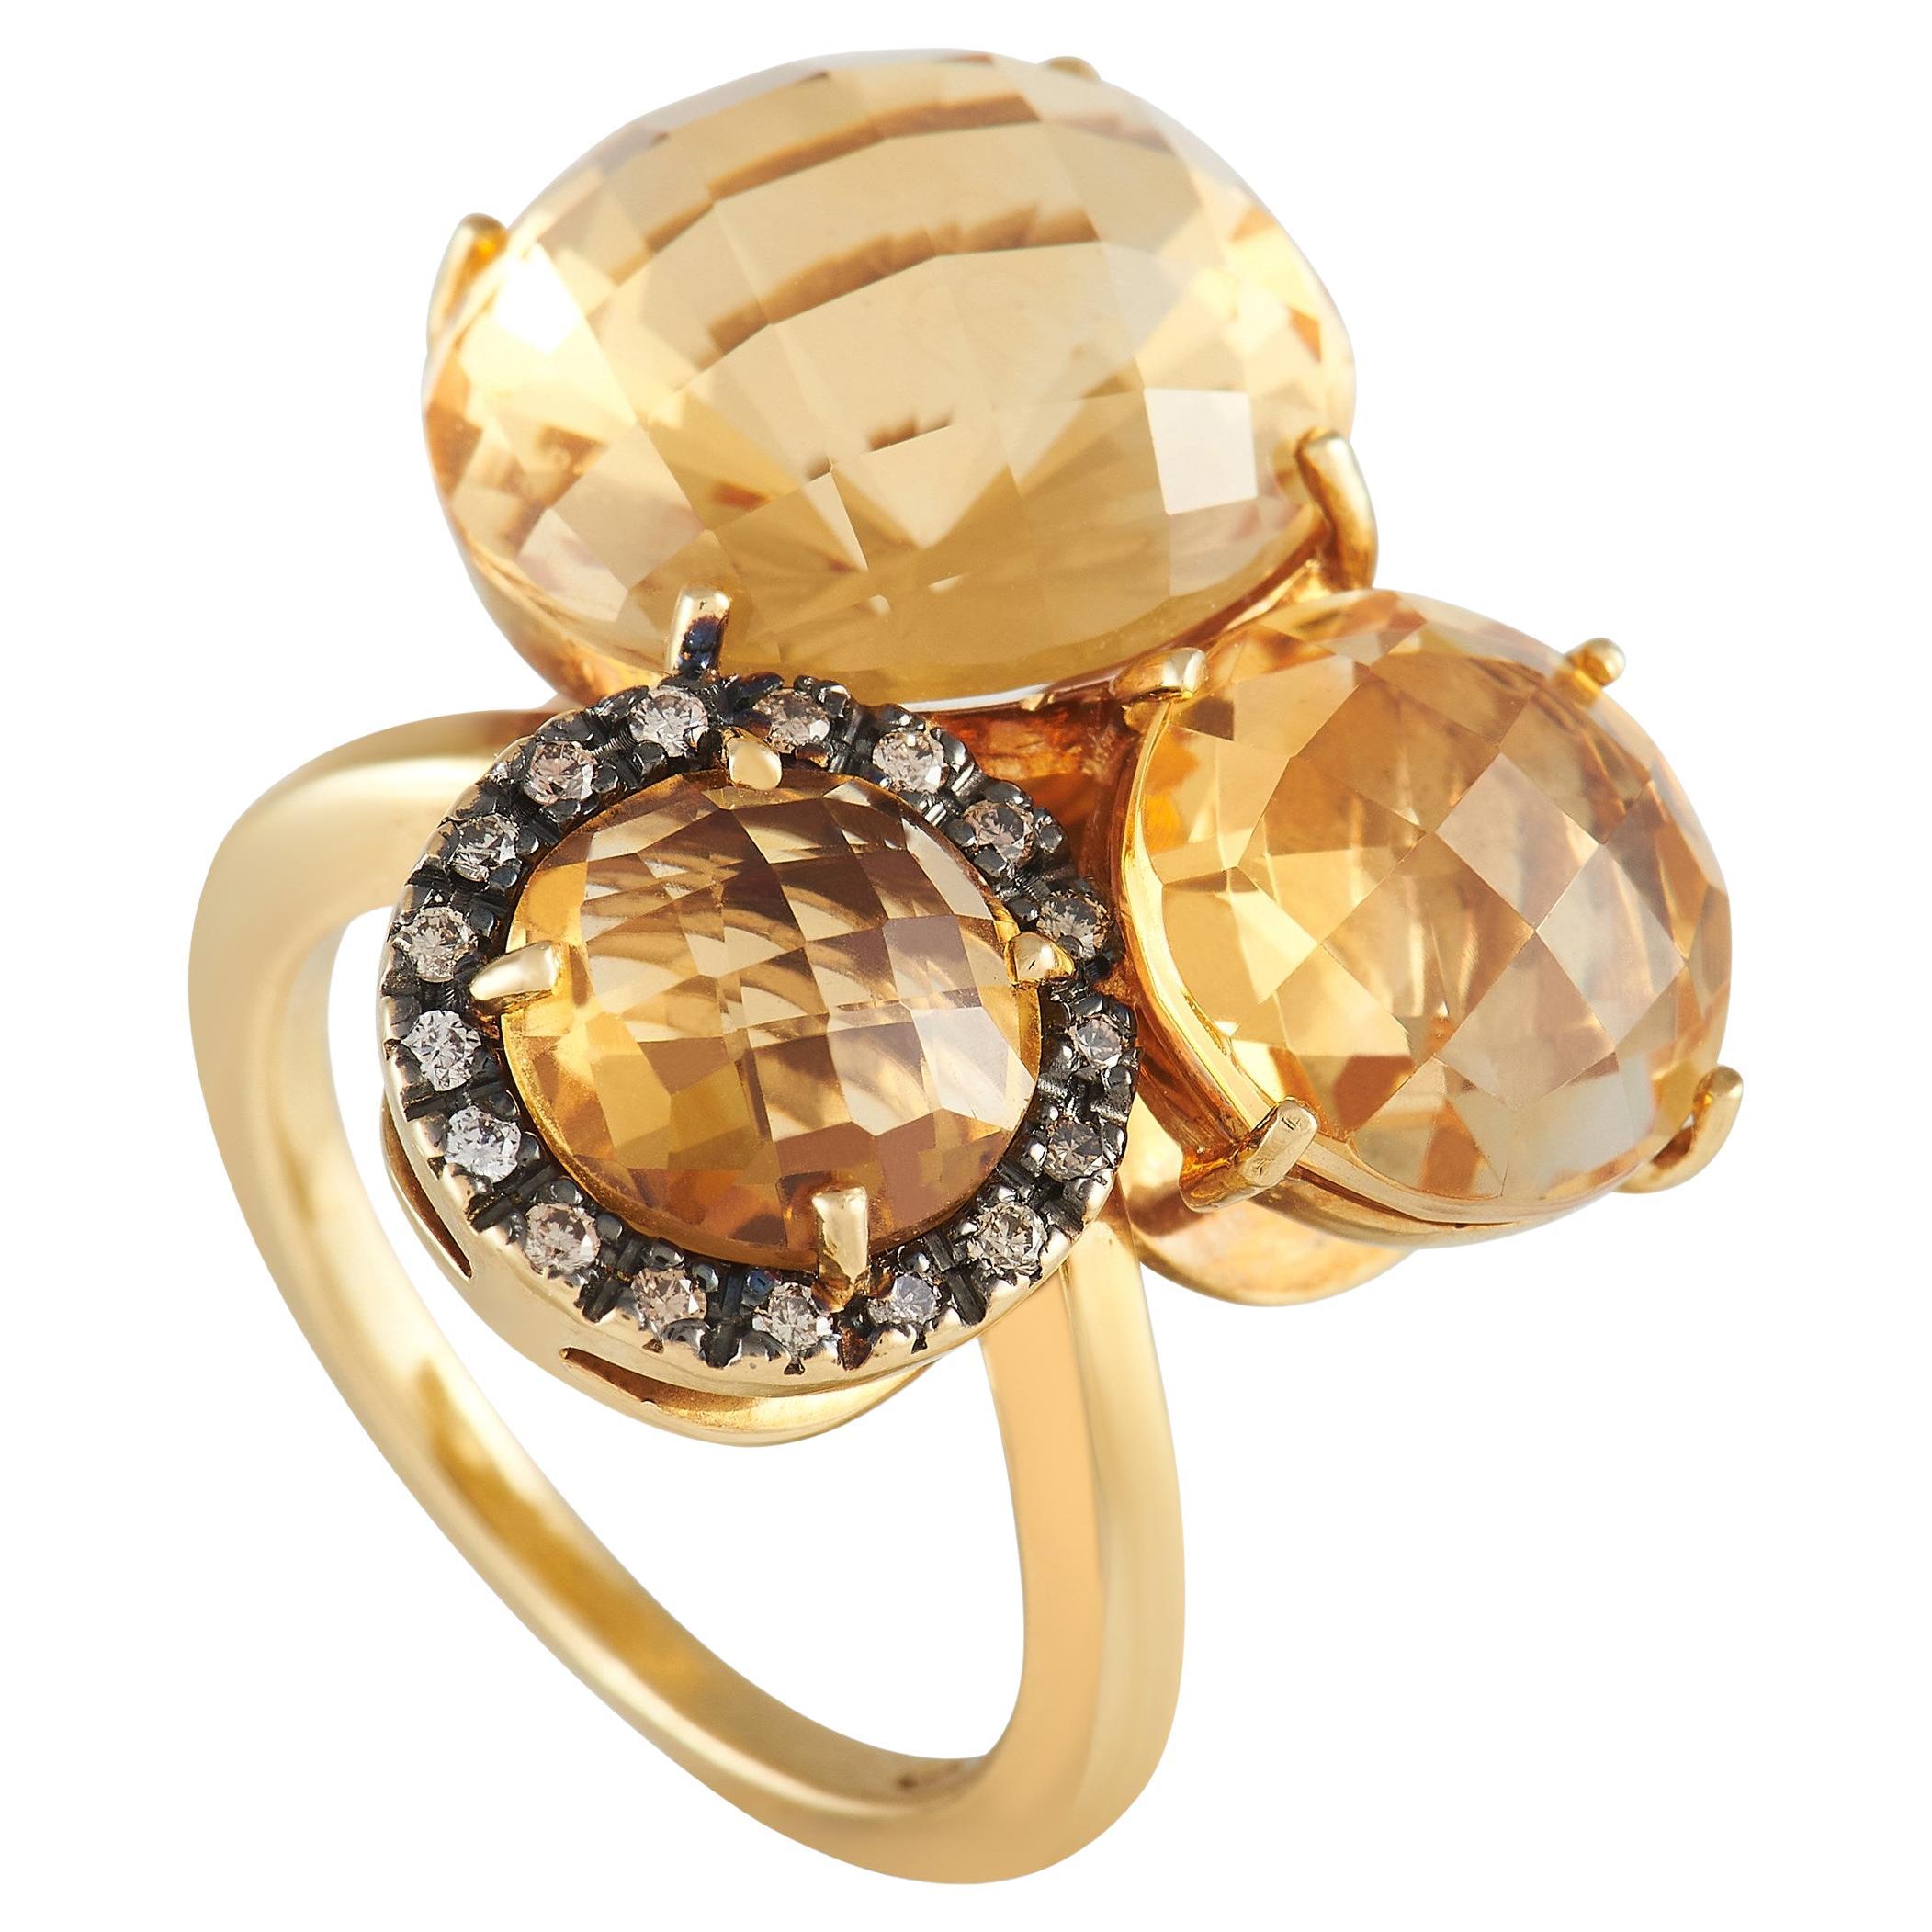 LB Exclusive 18K Yellow Gold 0.12 Ct Diamond and Citrine Ring